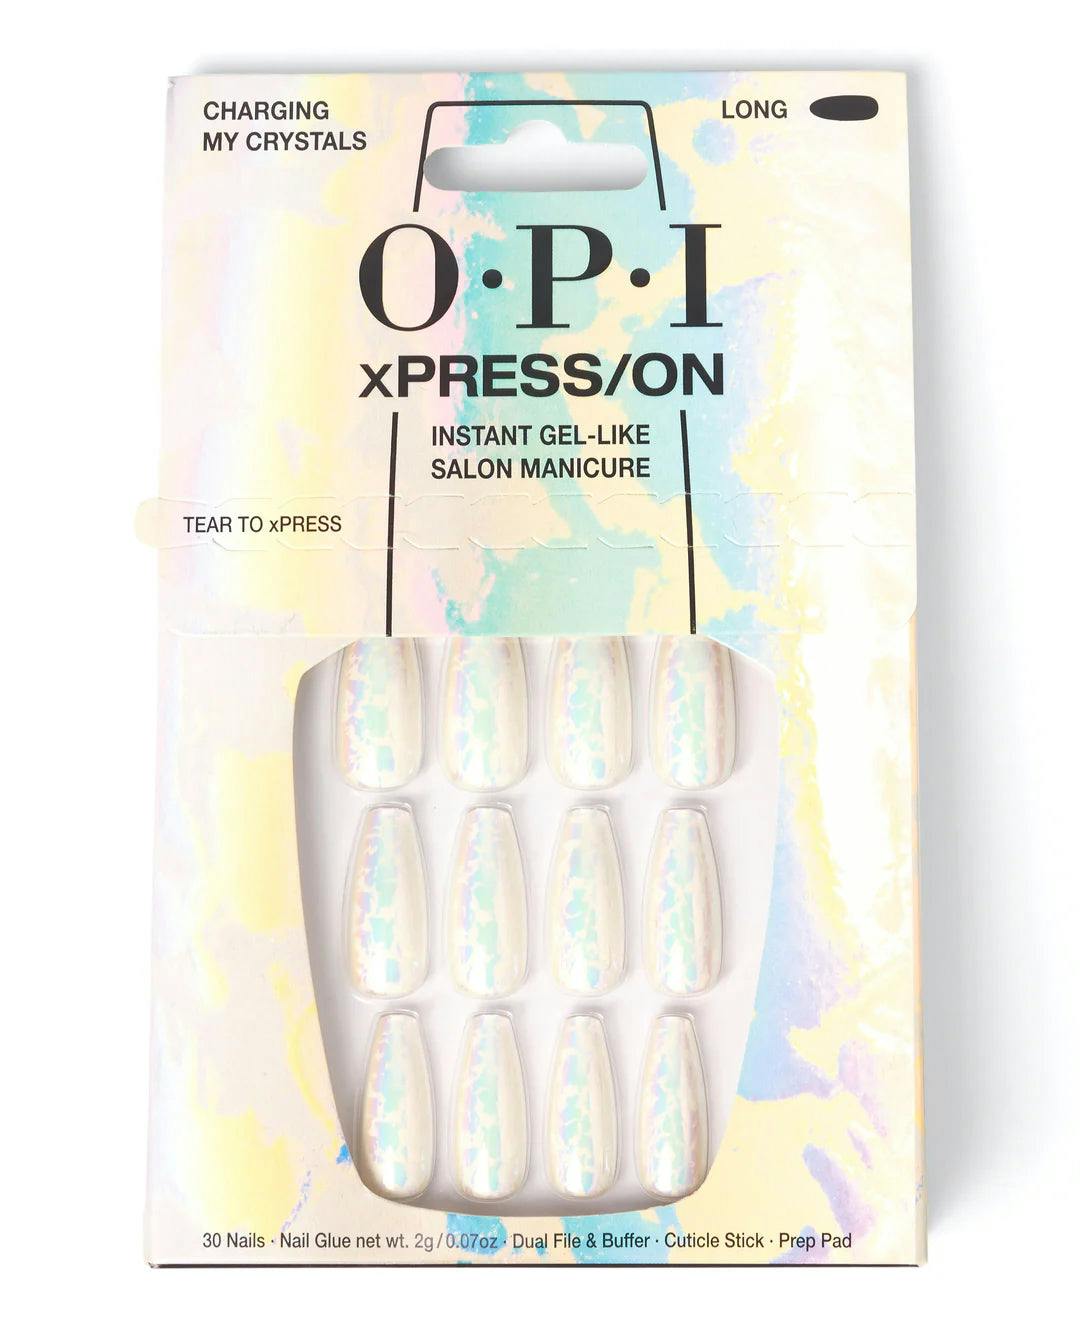 OPI xPRESS/ON Charging My Crystals  